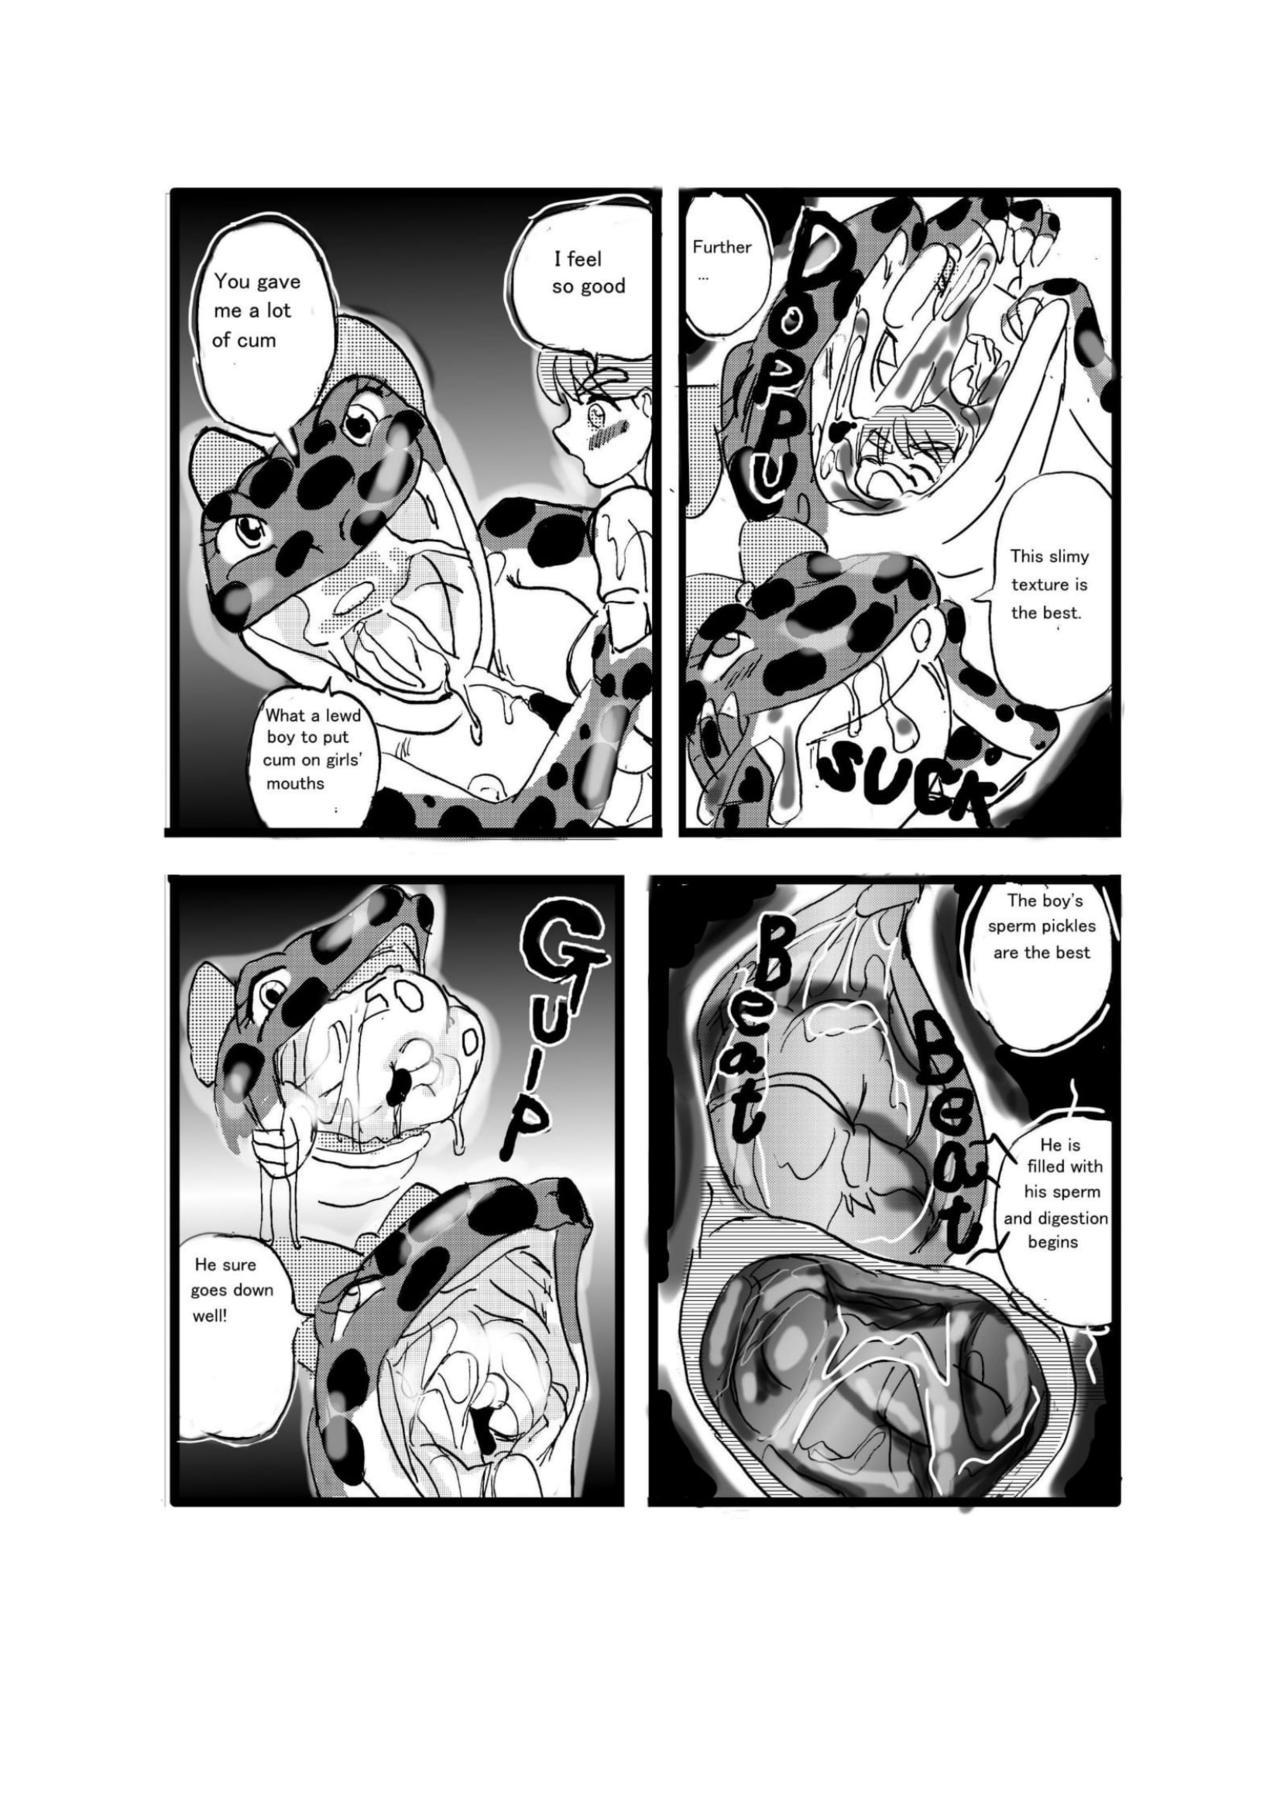 Missionary Position Porn Swallowed Whole vol.2 Waniko + What's Digestion? - Original France - Page 8